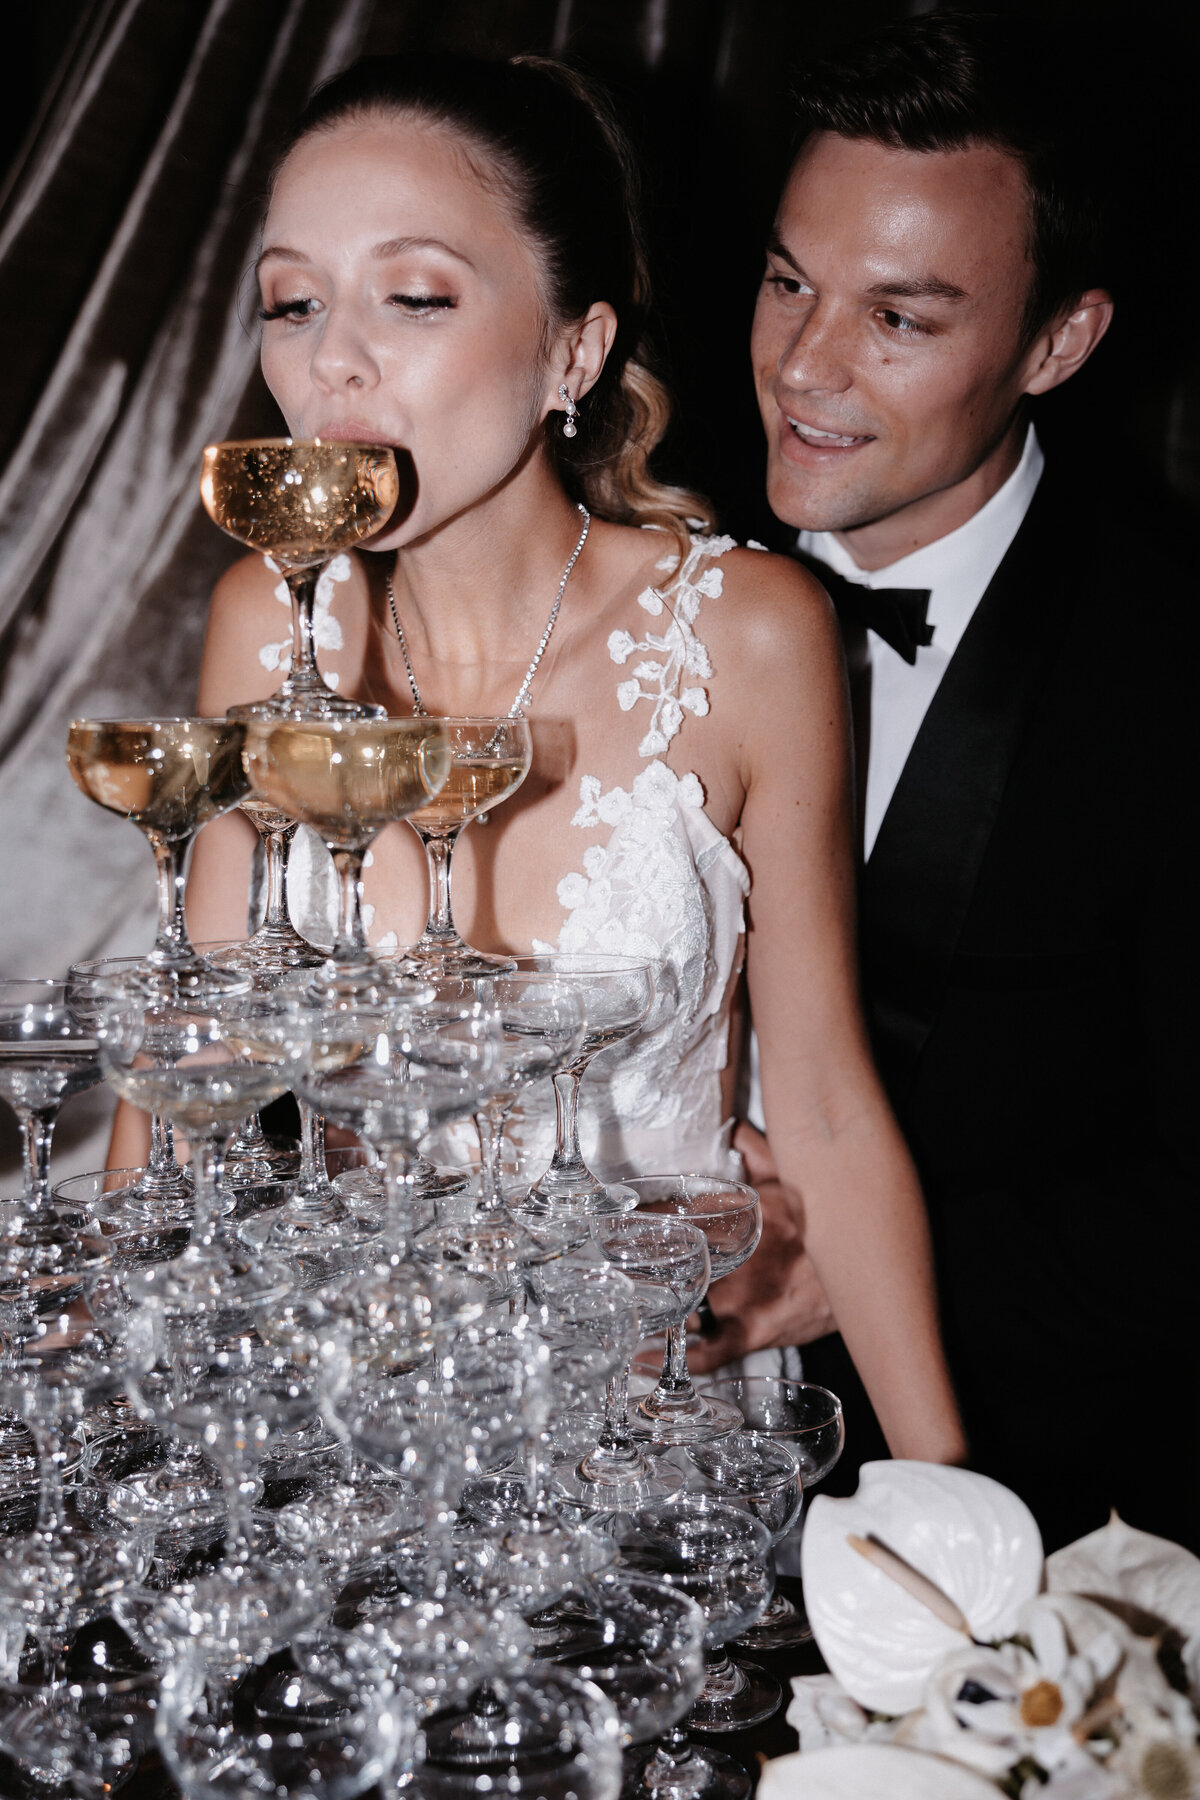 Elopement photography, bride sipping champagne from tower while groom holds her from behind smiling